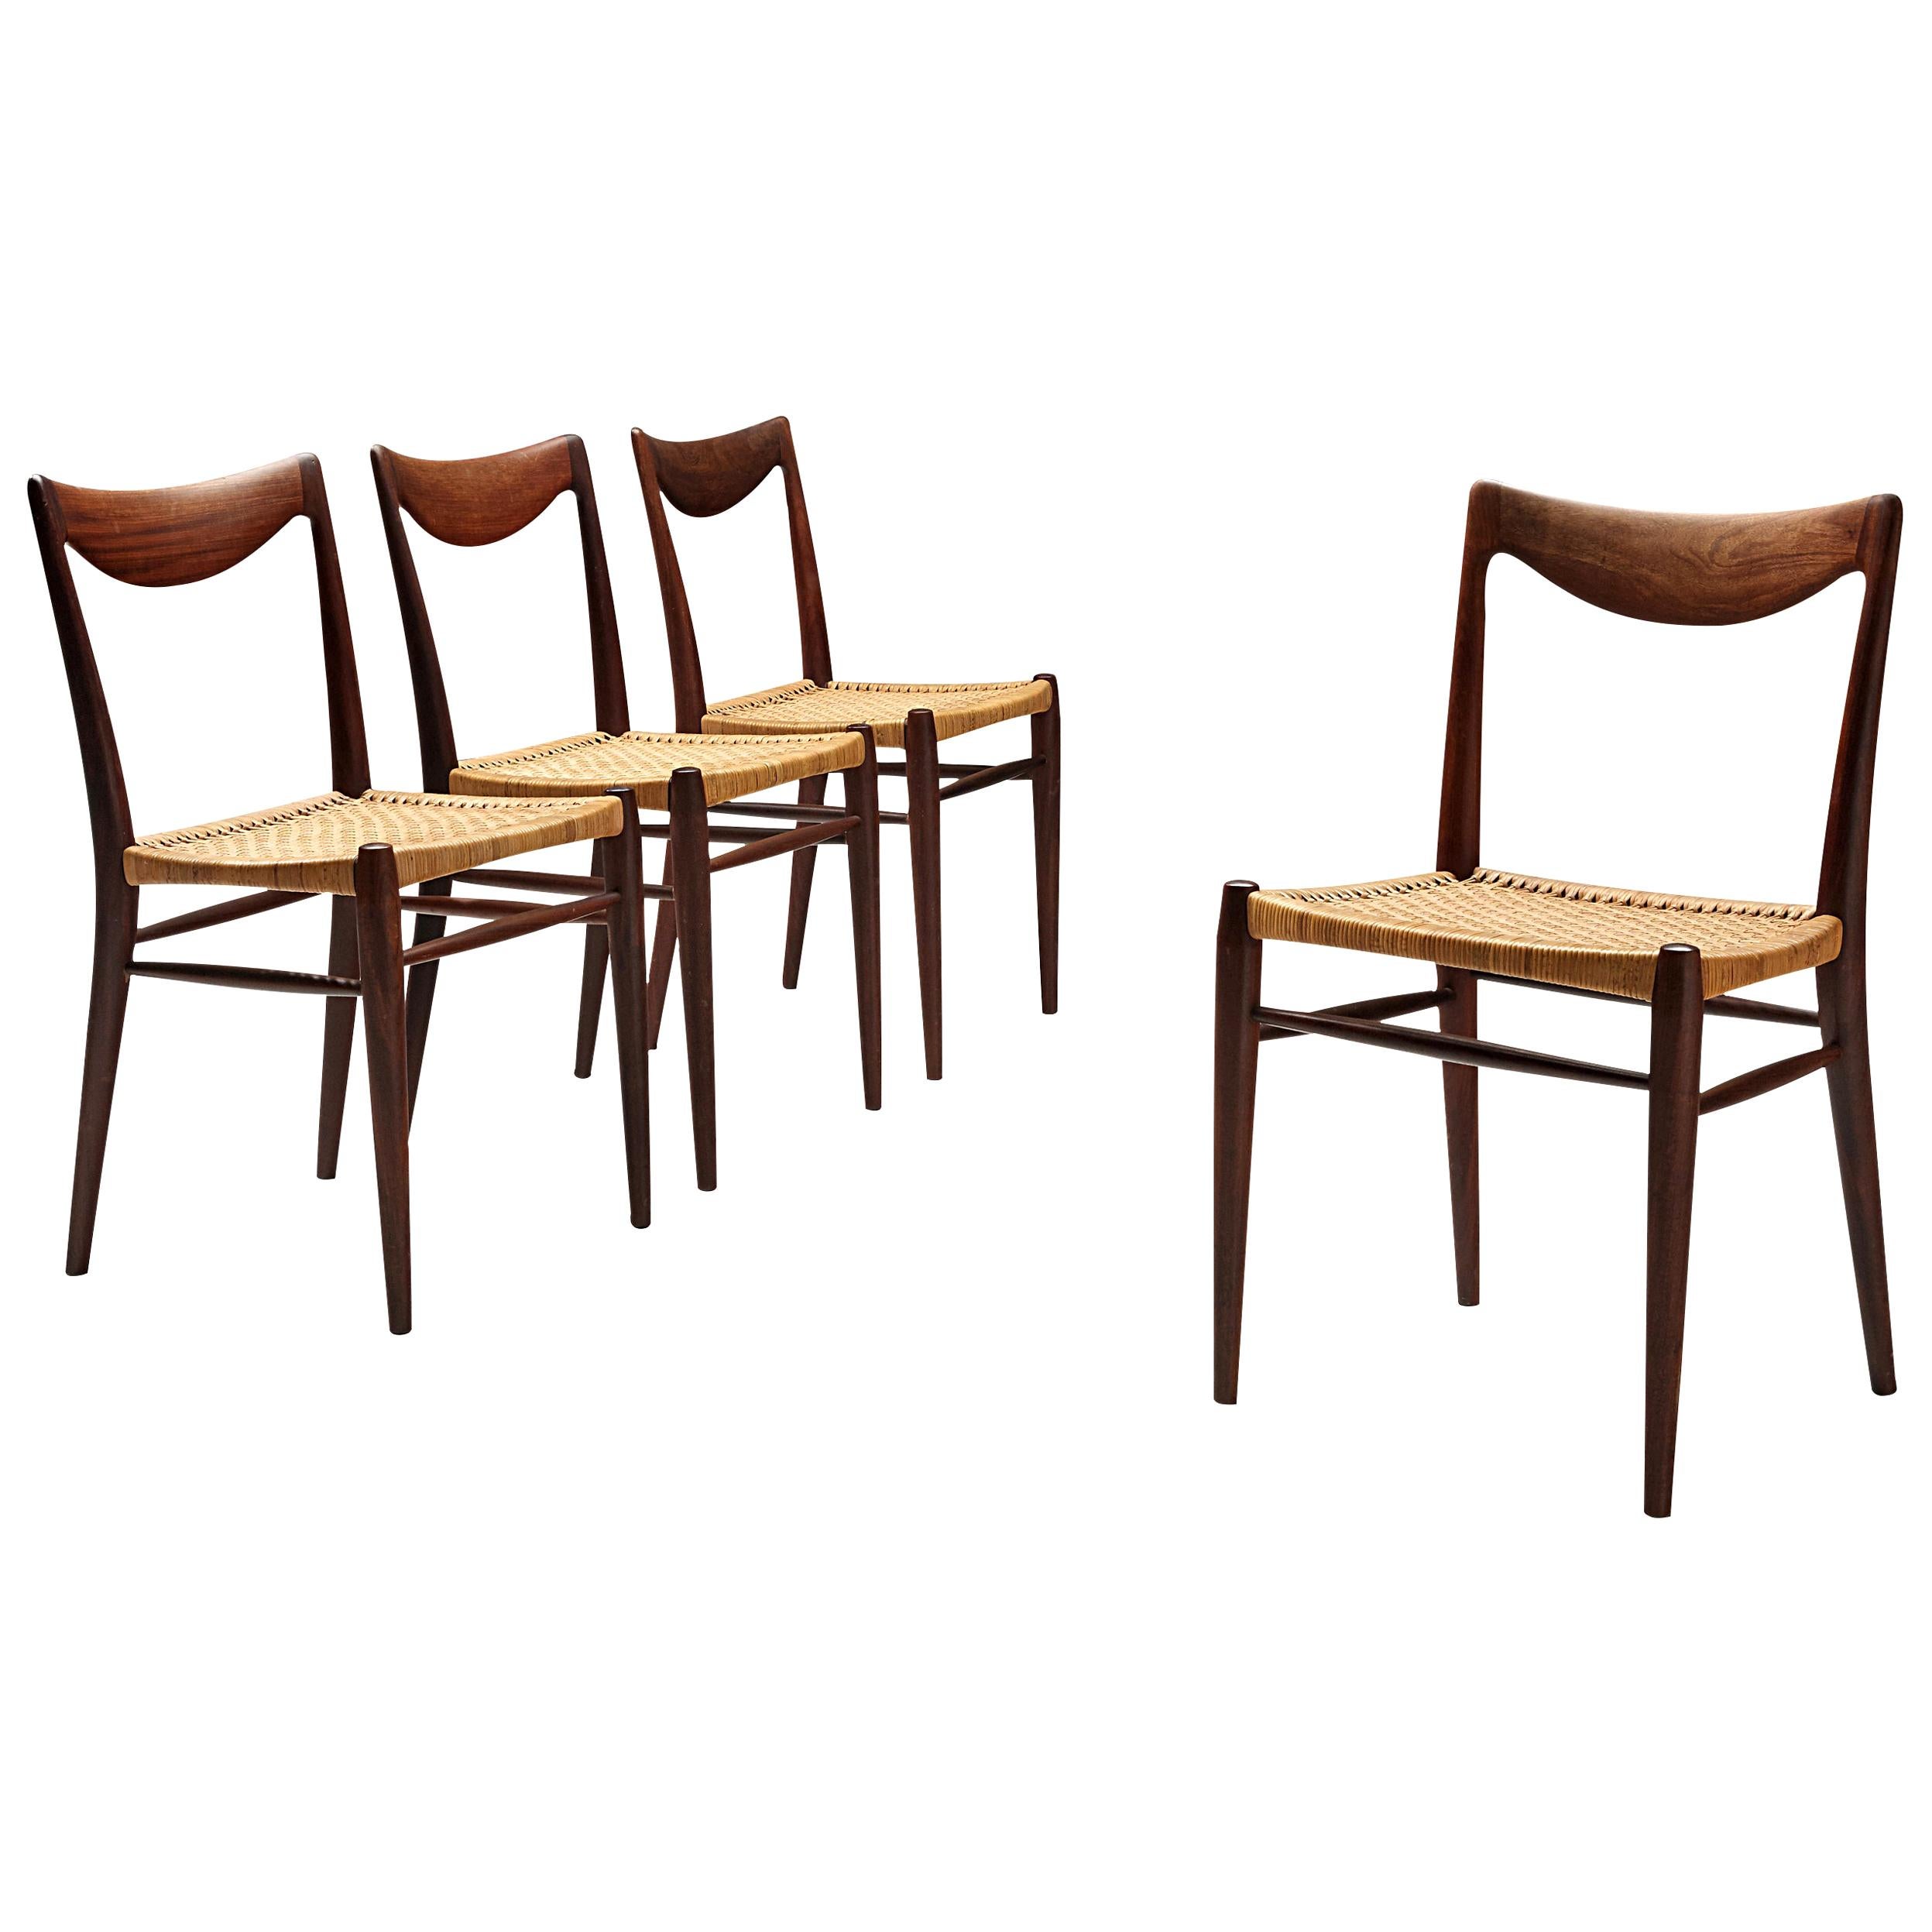 Adolf Relling and Rolf Rastad Set of Four Dining Chairs in Teak and Cane